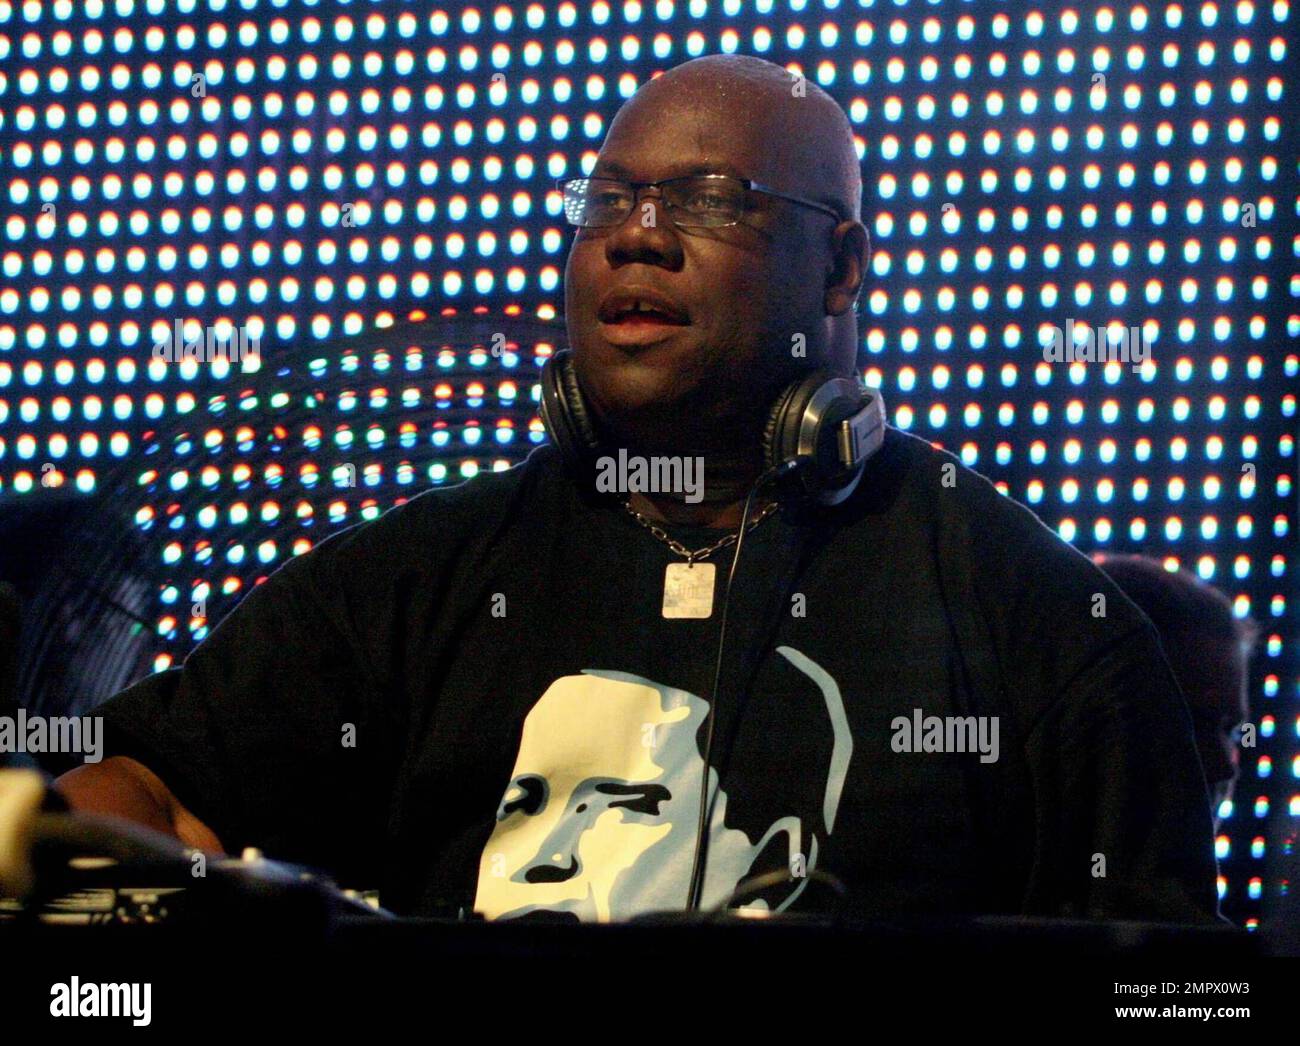 British techno and house DJ Carl Cox performs on day two of the Ultra Music Festival (UMF), the world's leading two-day electronic music experience.  South Florida's favorite music festival, internationally renowned for its memorable live performances and DJ sets from the world's top electronic and alternative rock artists, takes place during the 24th annual Winter Music Conference at the beautiful waterfront location of Bicentennial Park in downtown Miami (the same grounds it has occupied since 2006). Miami, FL. 3/28/09. Stock Photo